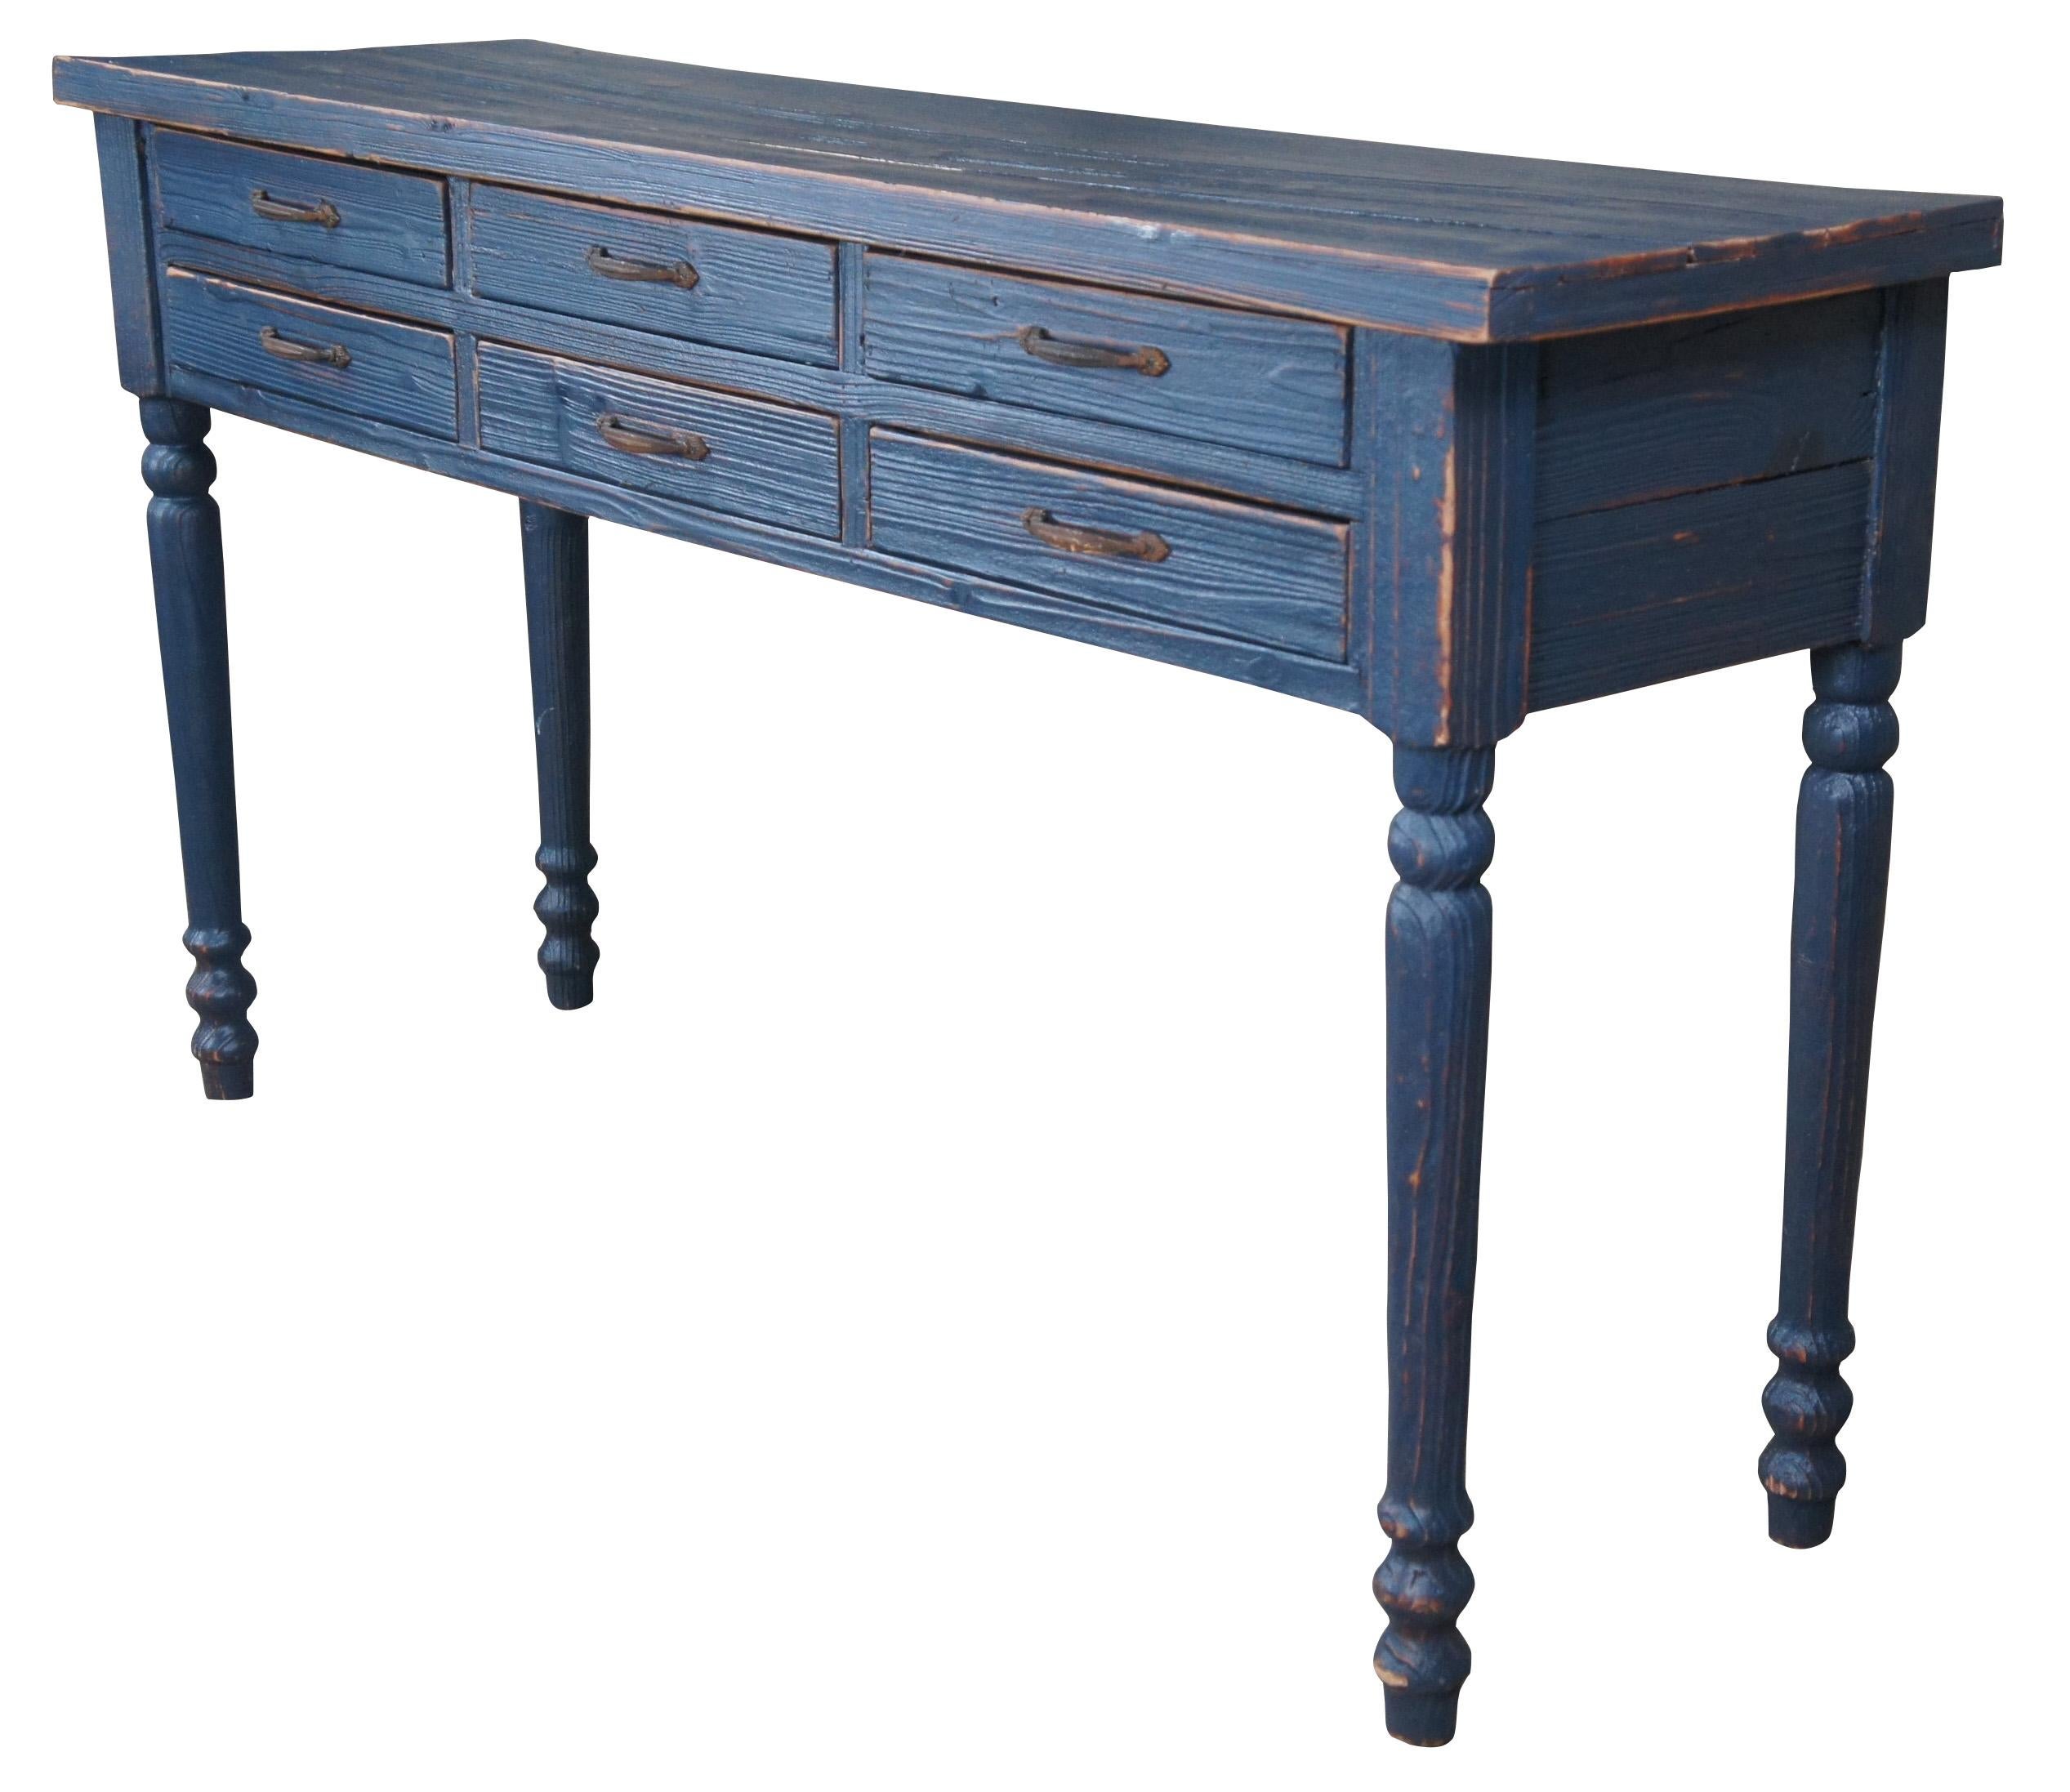 Vintage blue painted pine farmhouse sideboard, console or sofa table featuring rectangular form with six drawer and turned legs. Measure: 55